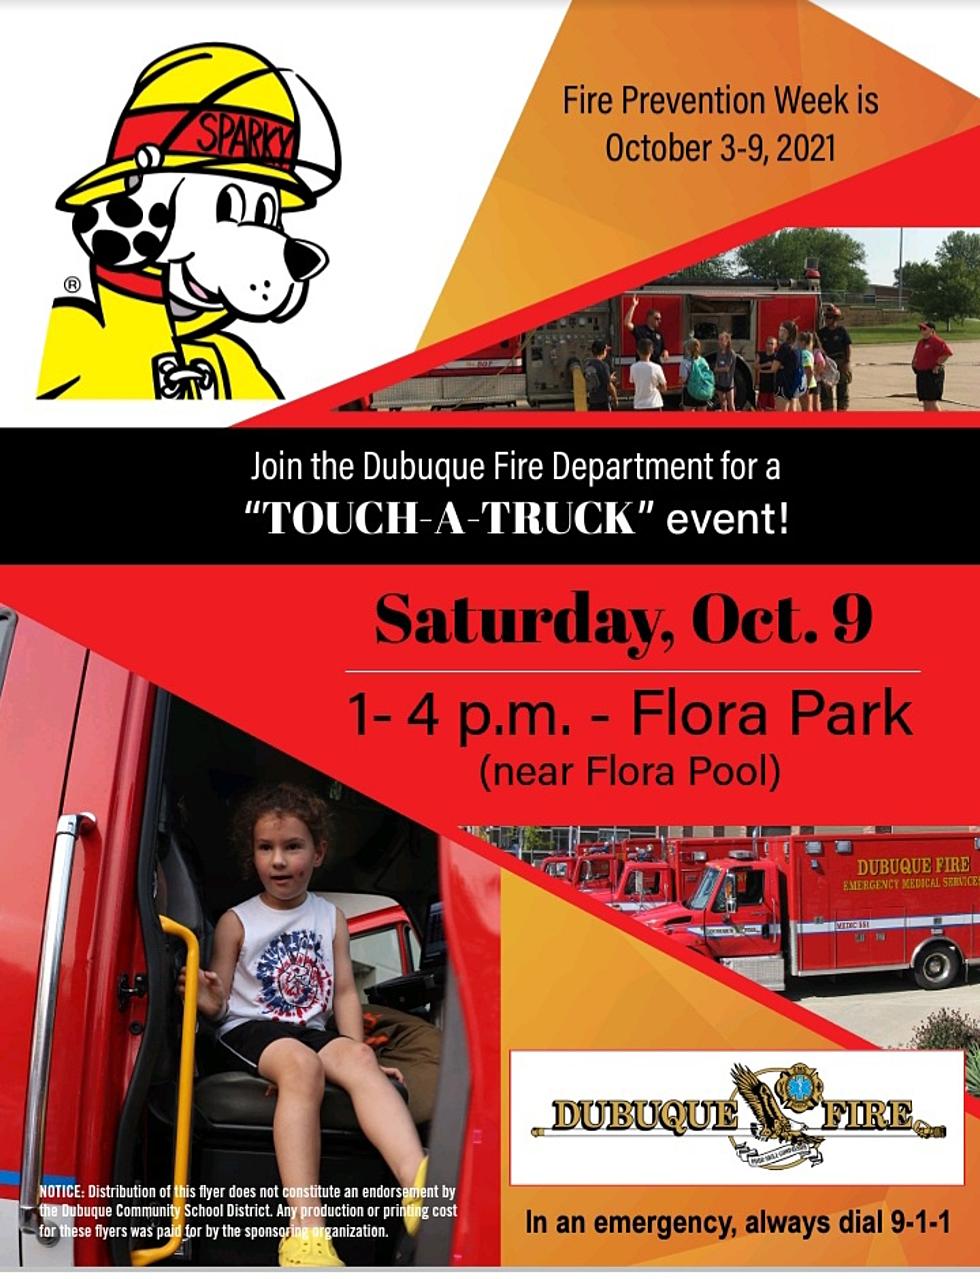 Dubuque Fire Department to Mark Fire Prevention Week Saturday Oct 9, 2021